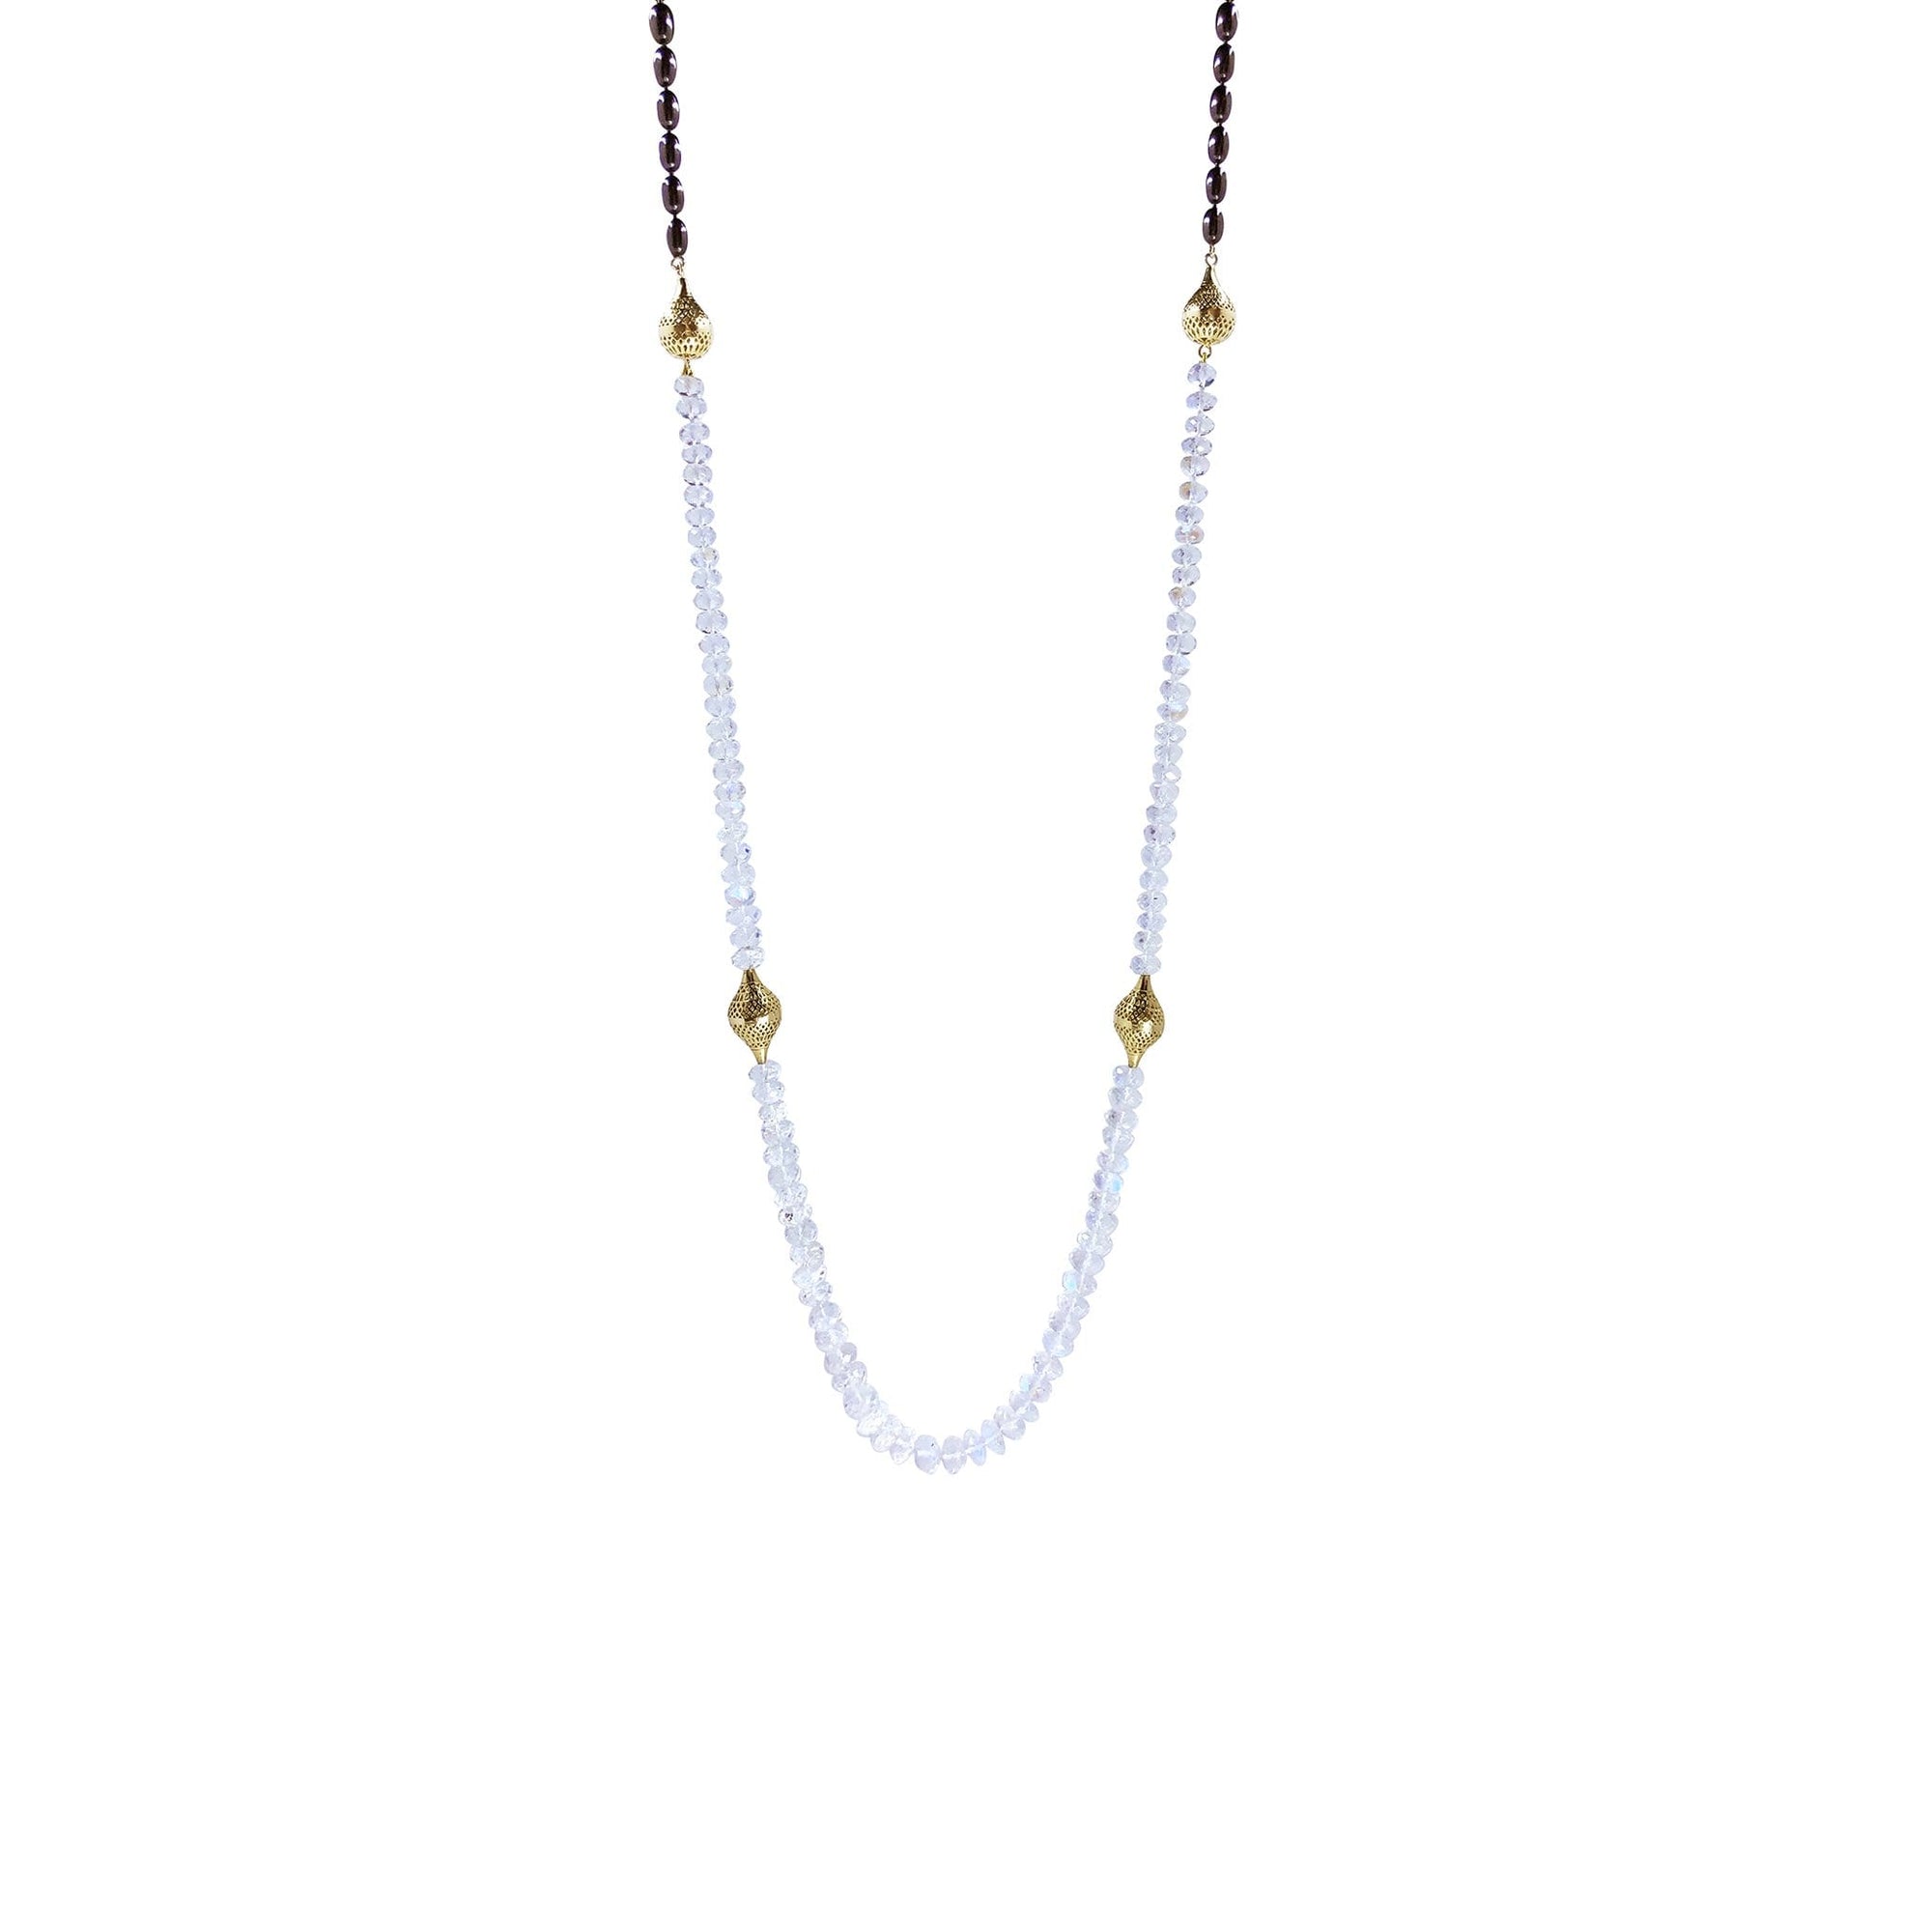 Moonstone Beads Necklace